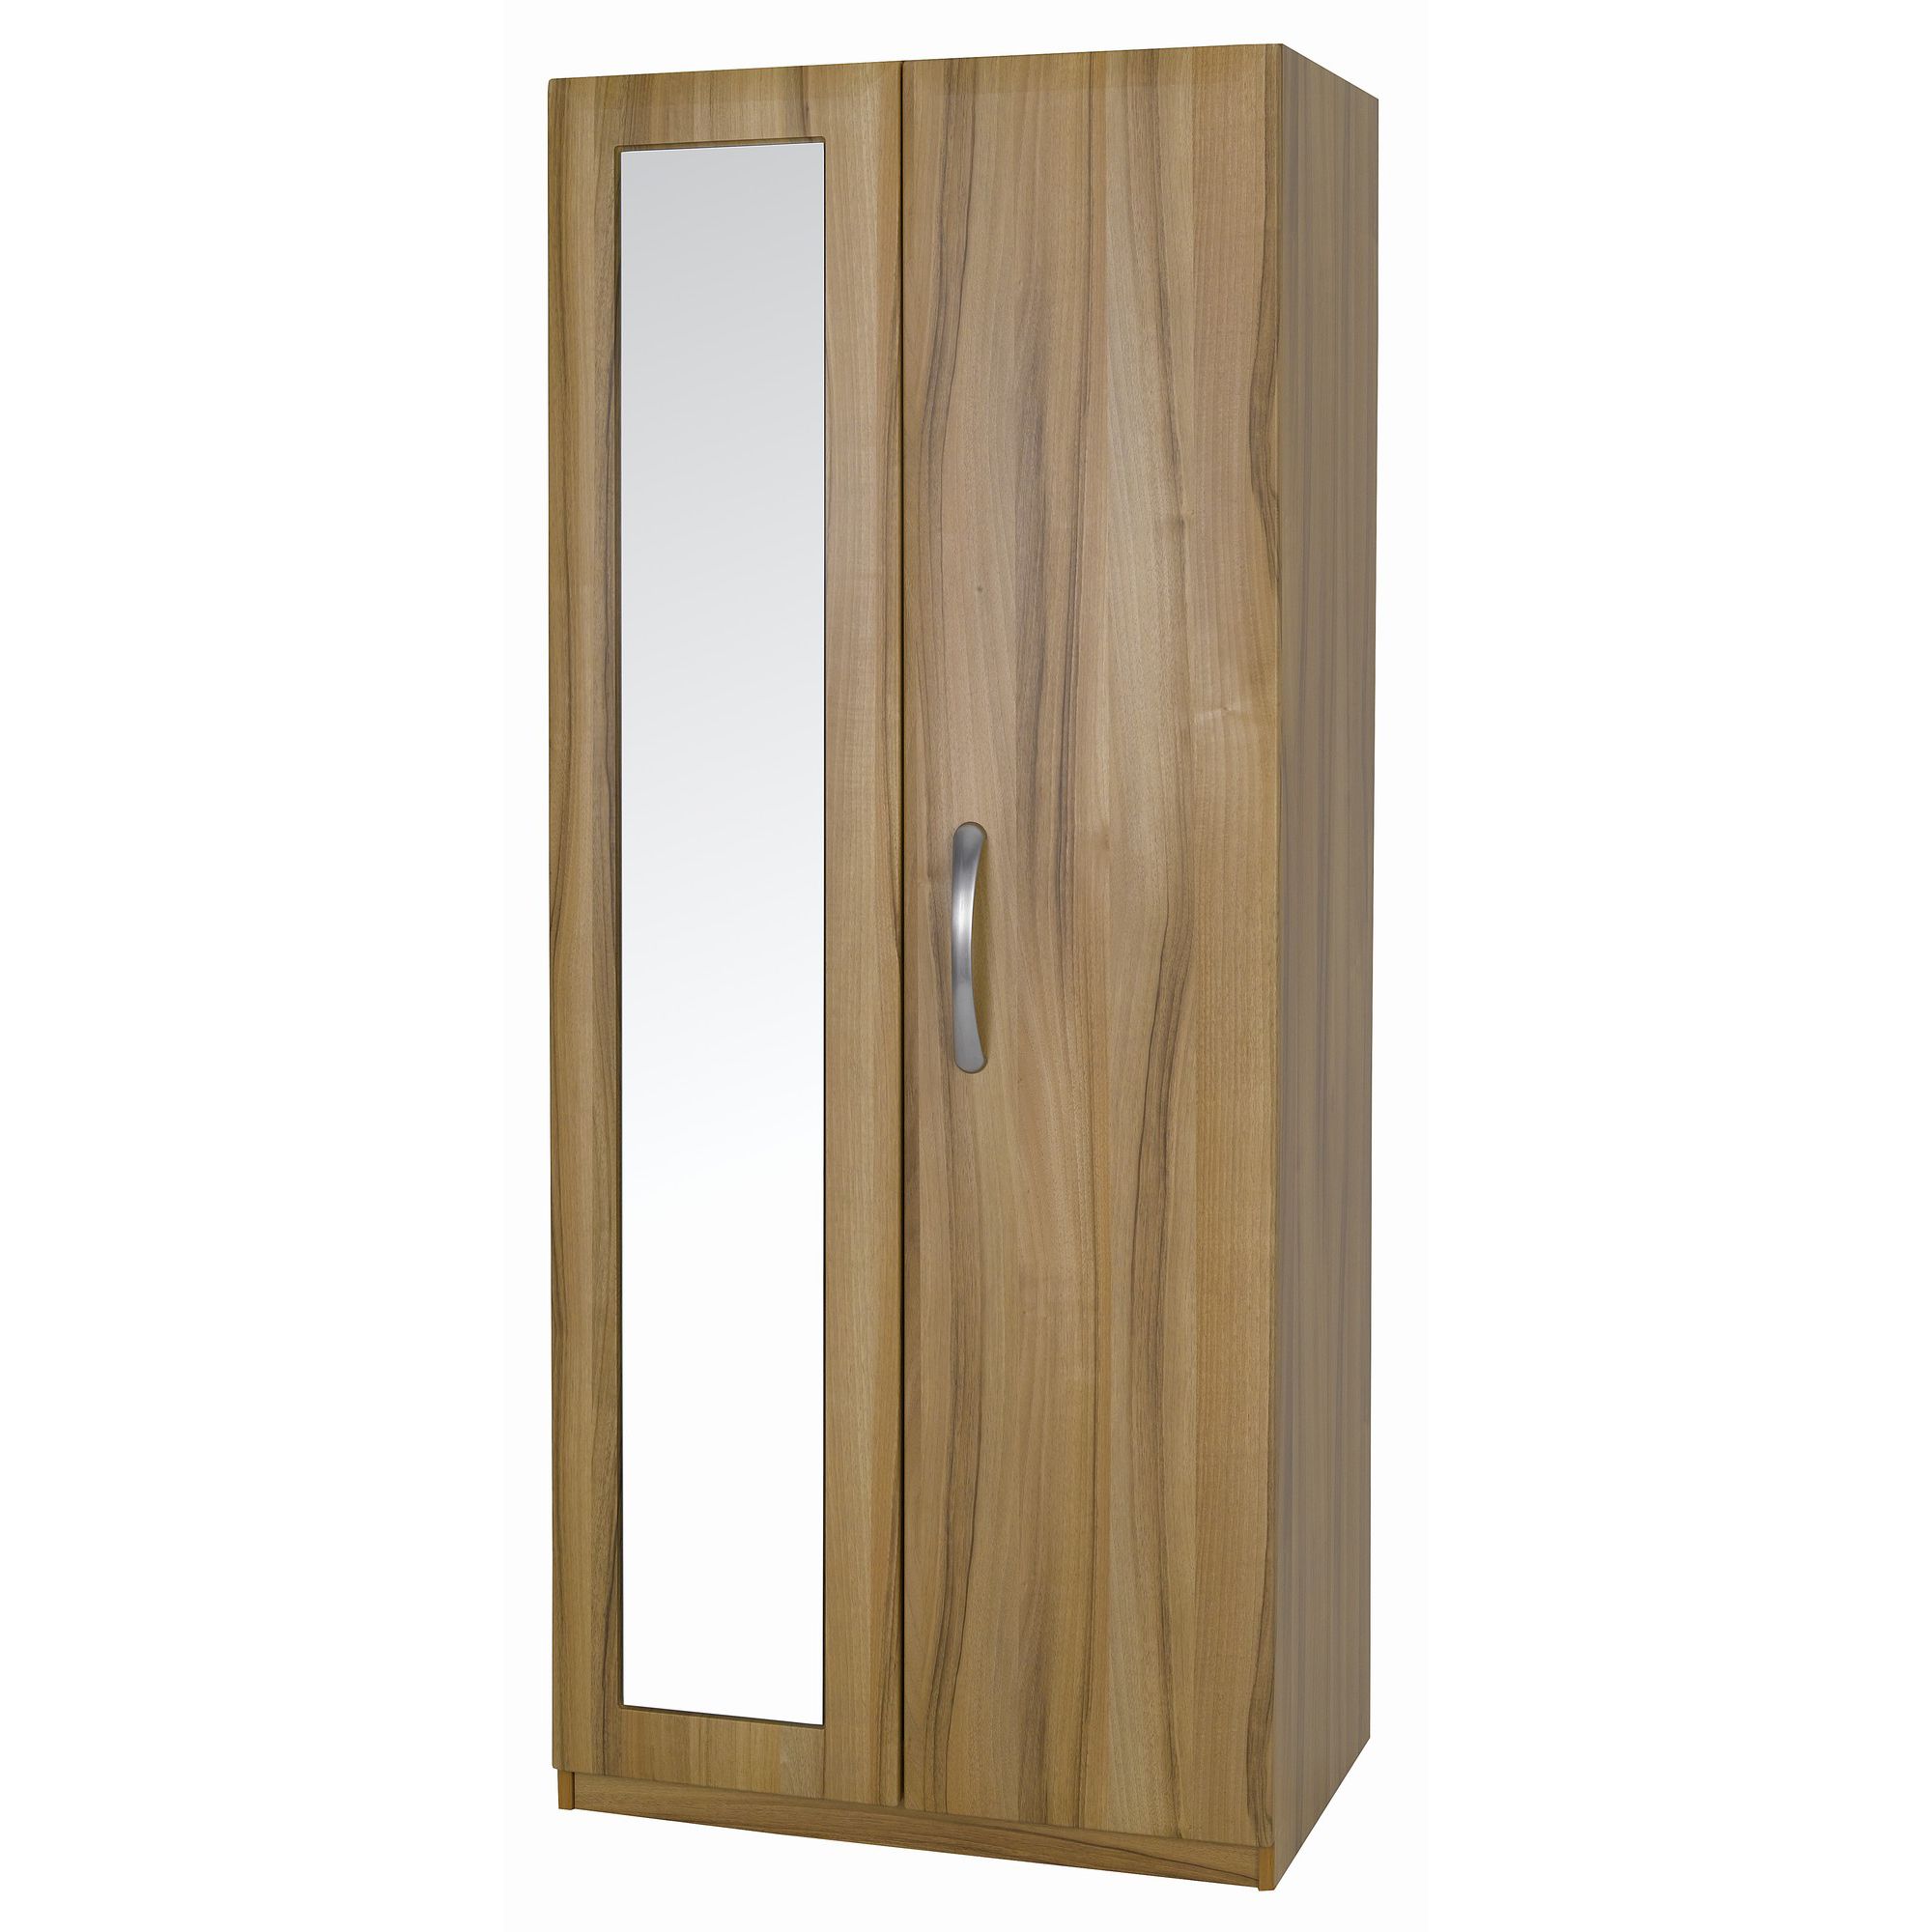 Alto Furniture Visualise Tipolo Wardrobe with Mirror in Golden Walnut at Tescos Direct